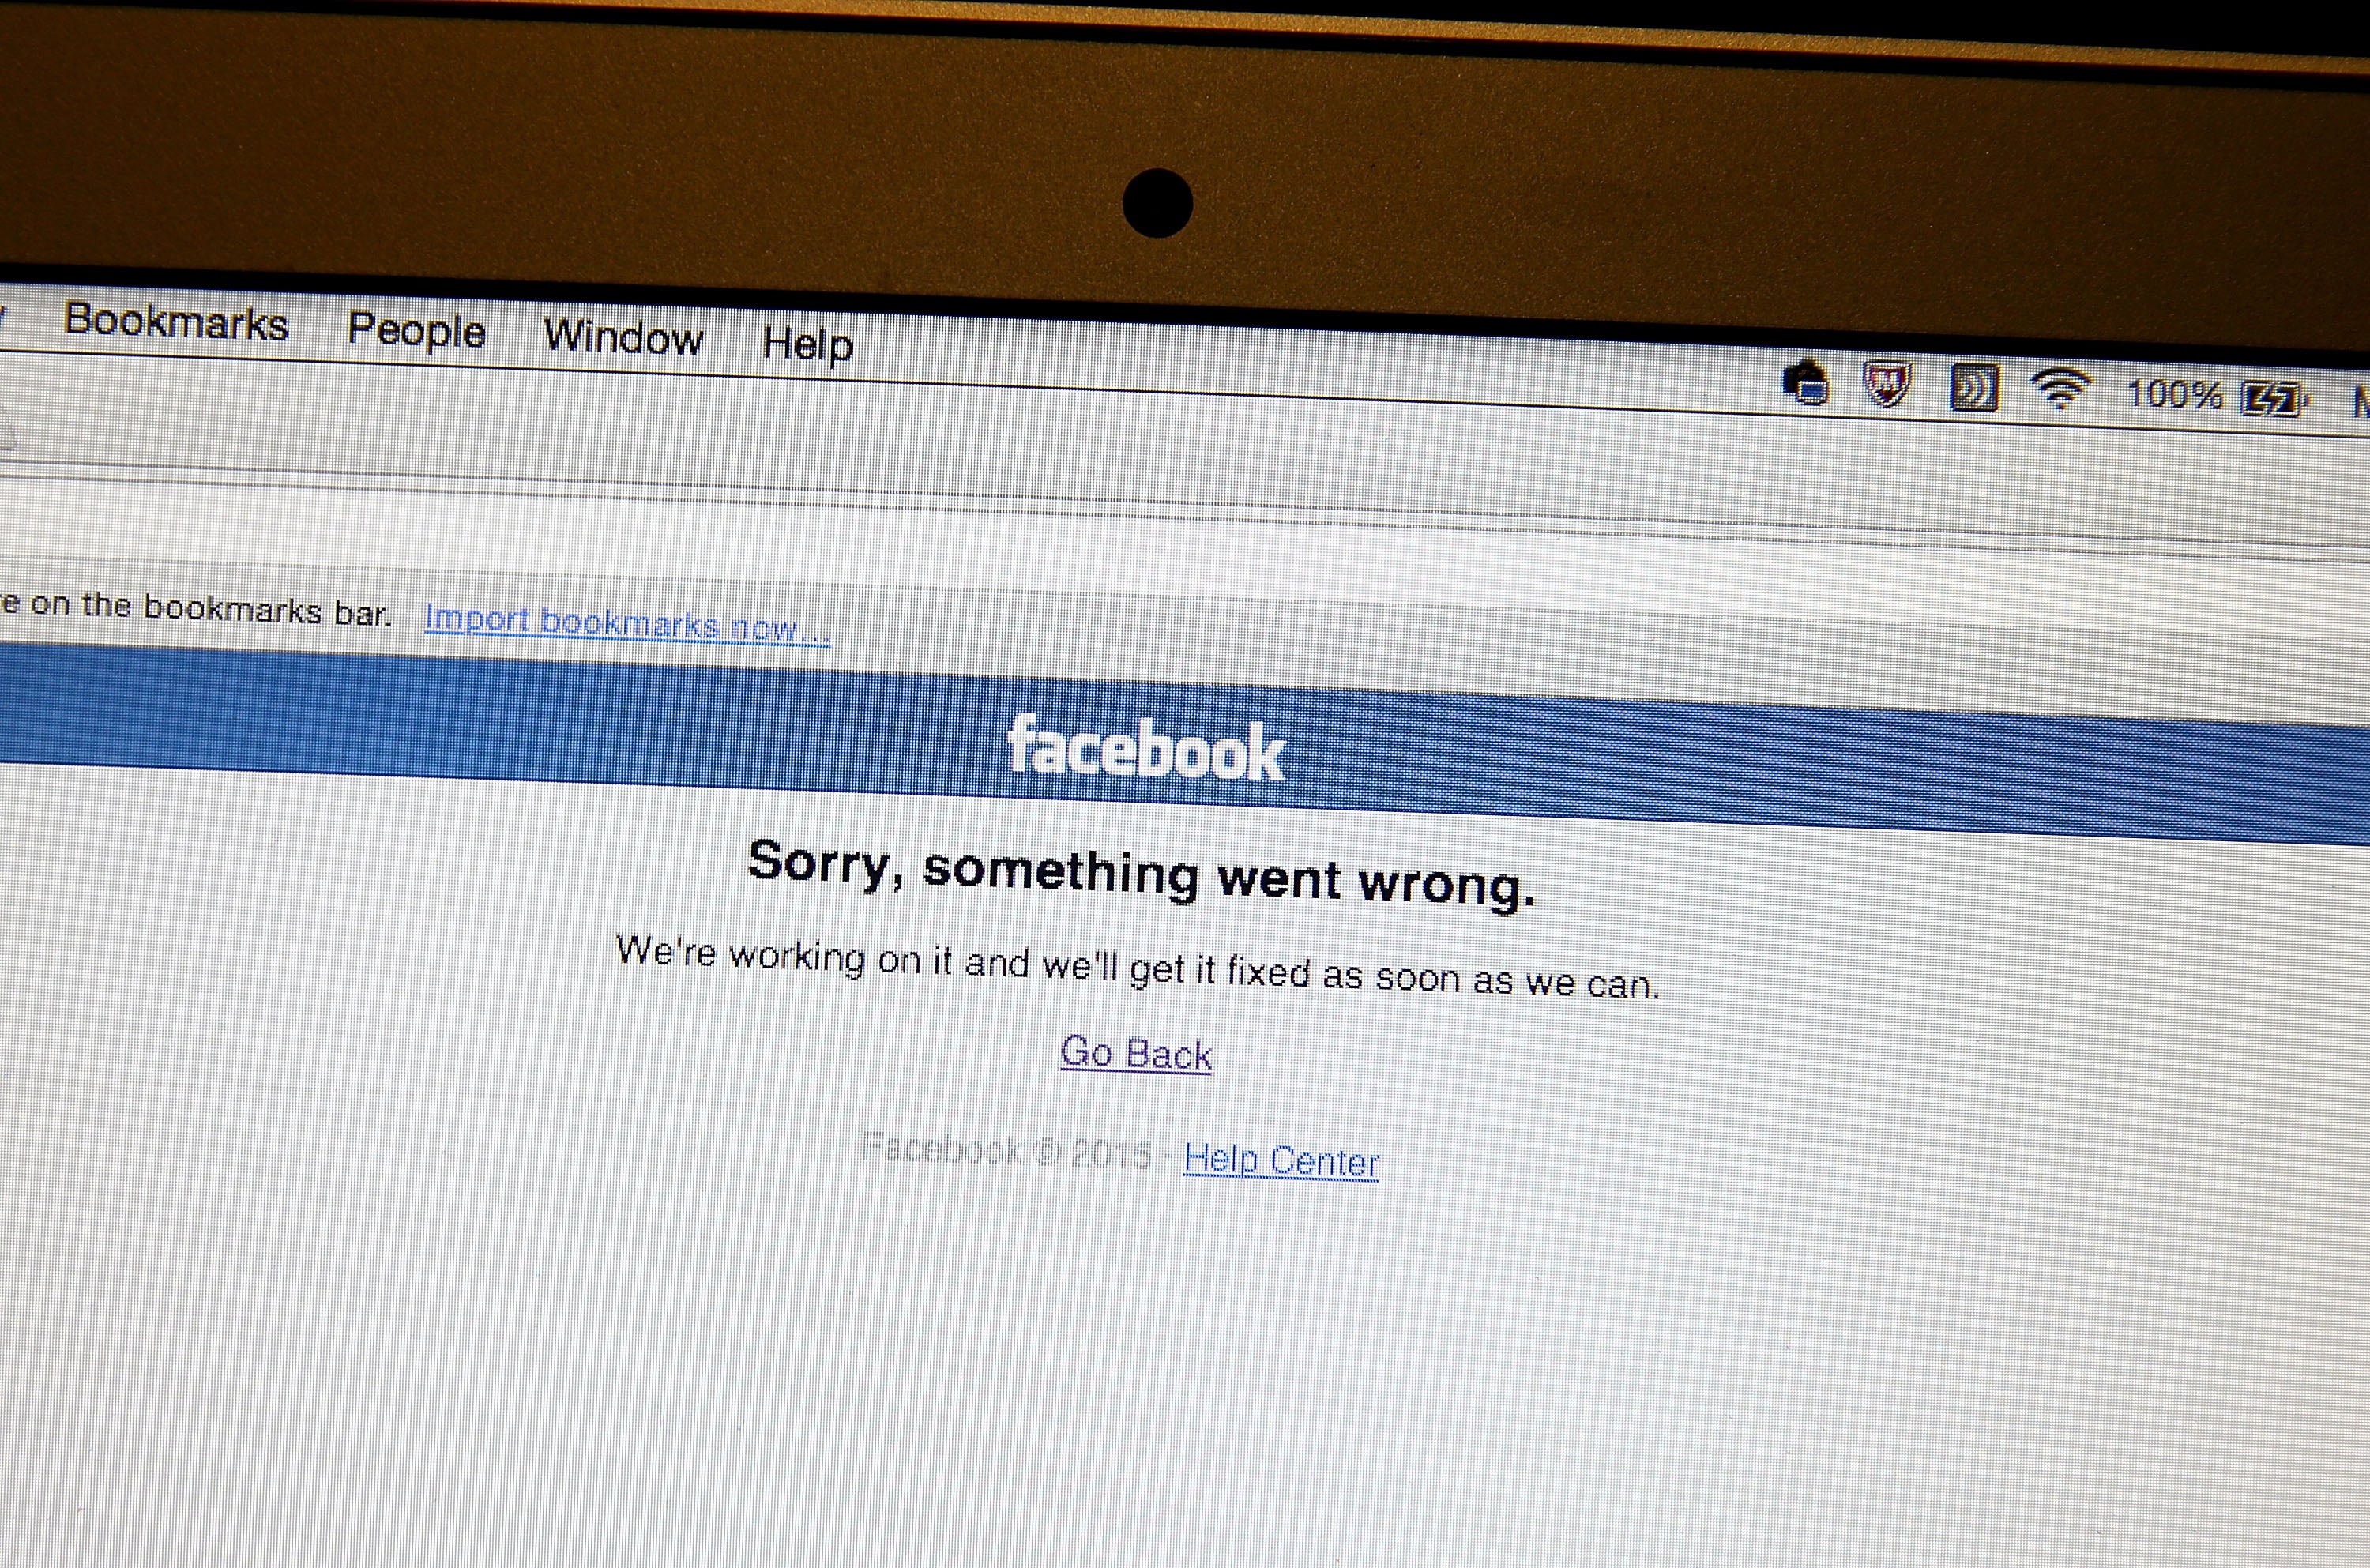 Facebook went down for the second time in a week on Monday night.